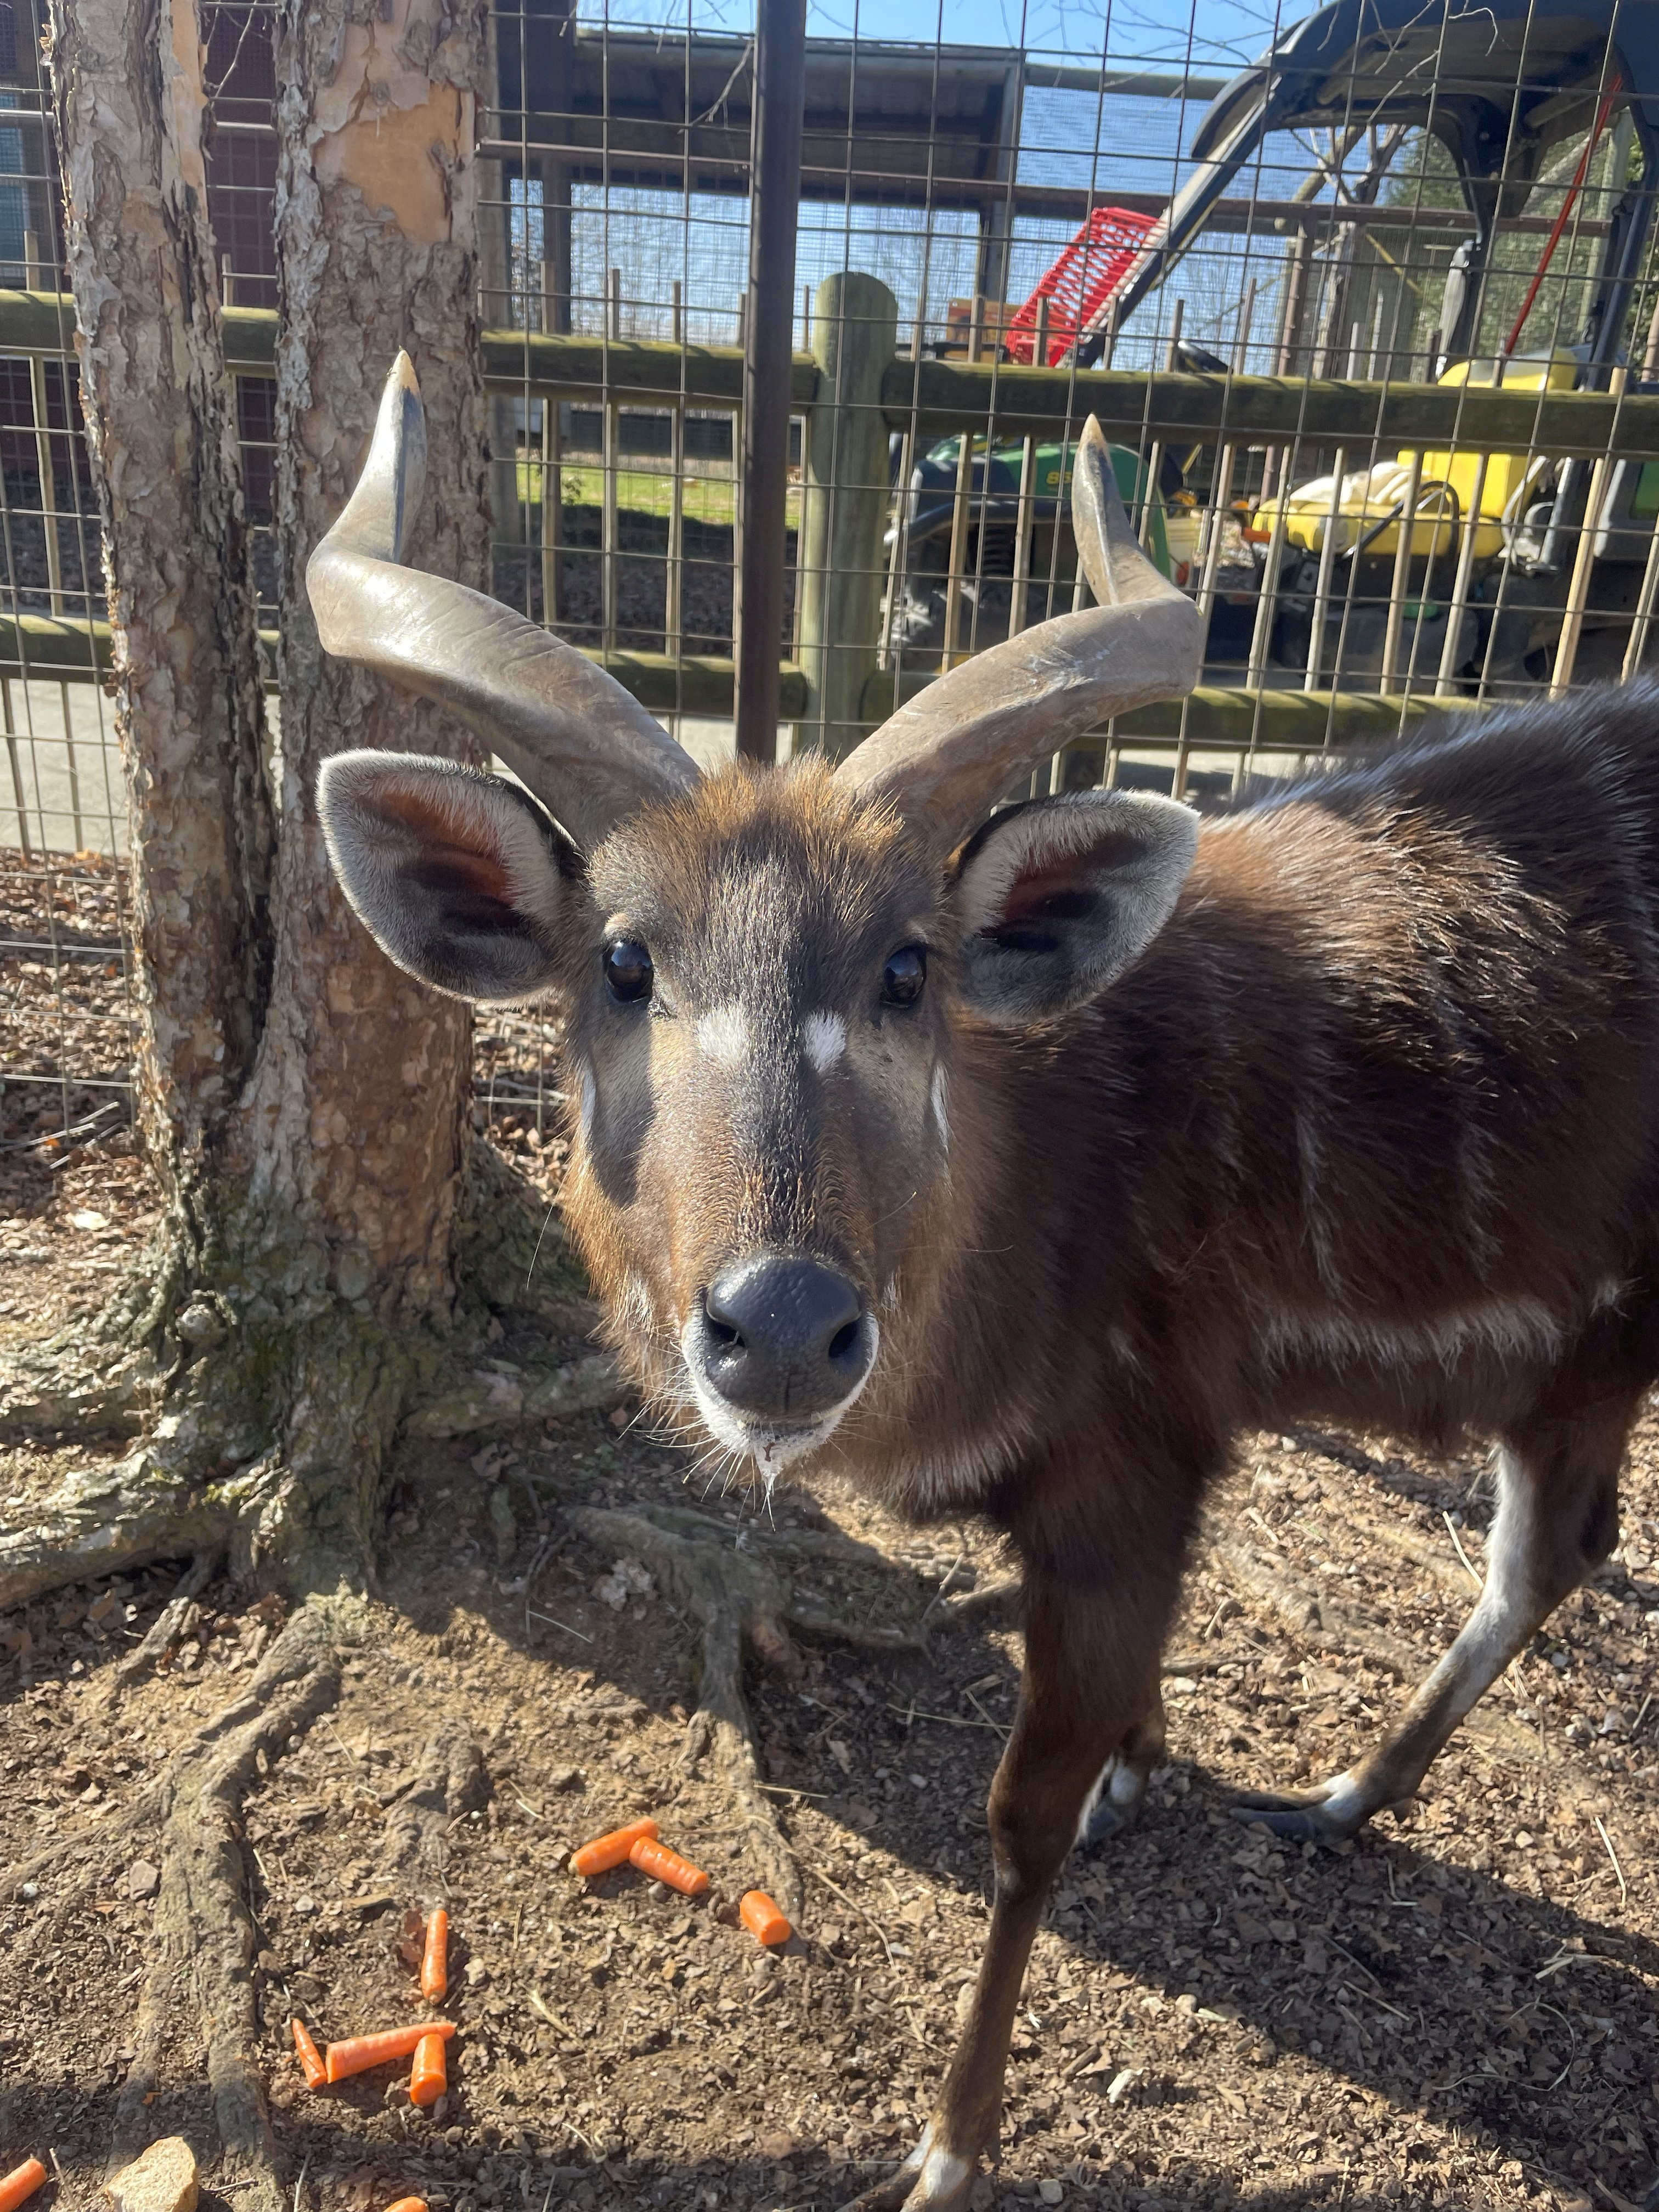 Handout photo of rare antelope named Lief at Bright Zoo in Tennessee